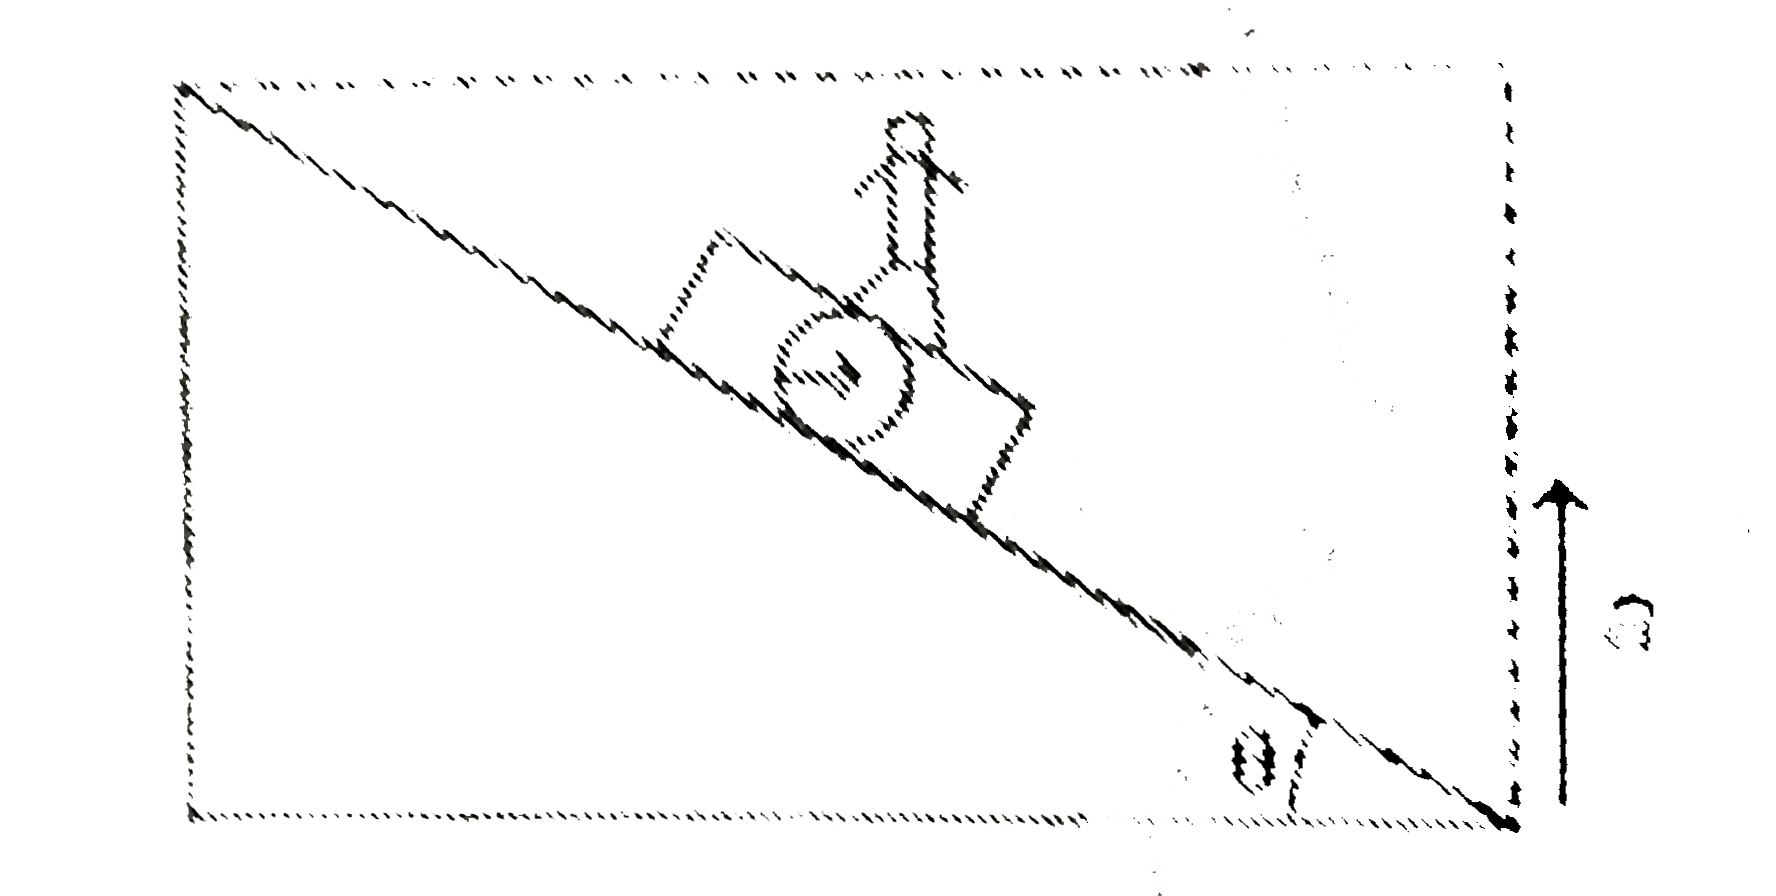 A man of mass m=60kg is standing on weighing machine fixed on a triangular wedge of angle theta=60^(@) as shown in the figure. The wedge is moving up with an upward acceleration alpha=2m//s^(2). The weight regiatered by machine is